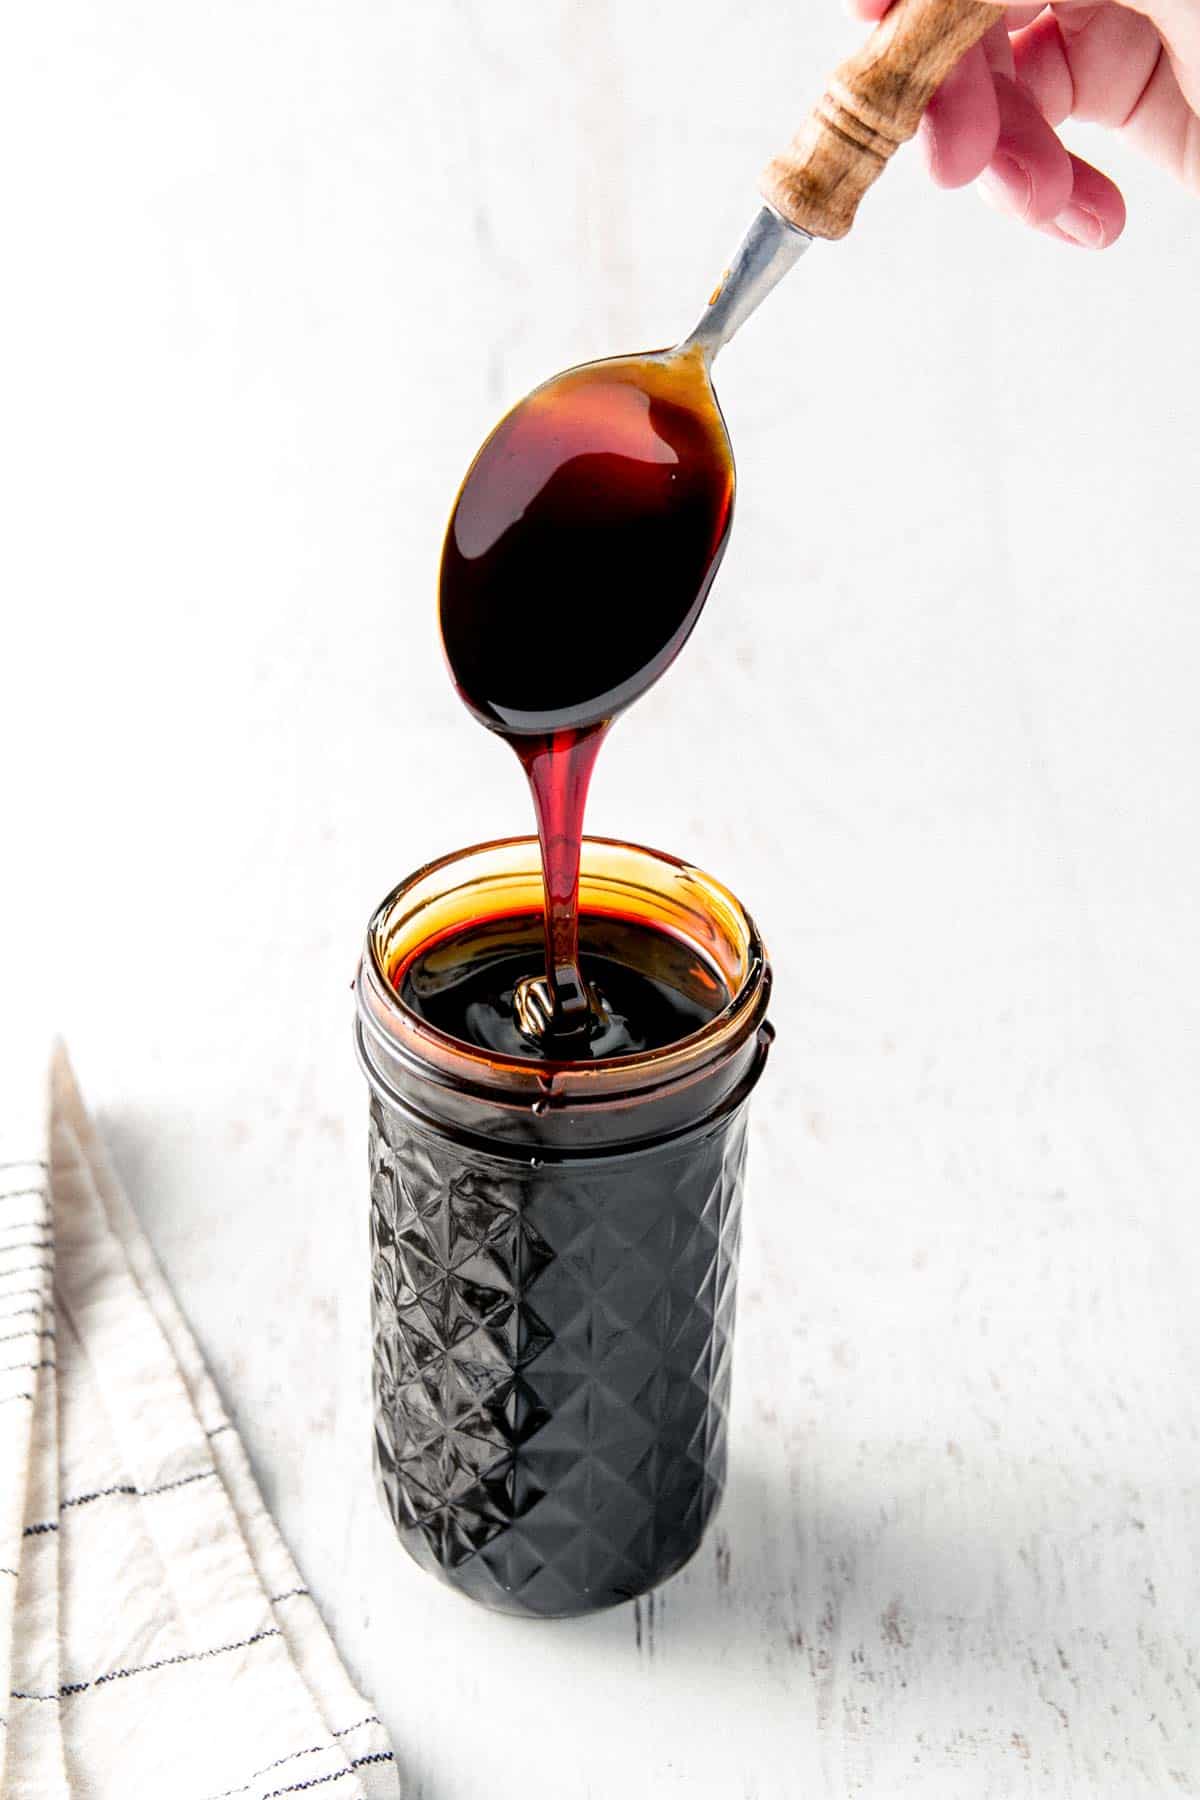 Molasses dripping from spoon into a quilted mason jar.